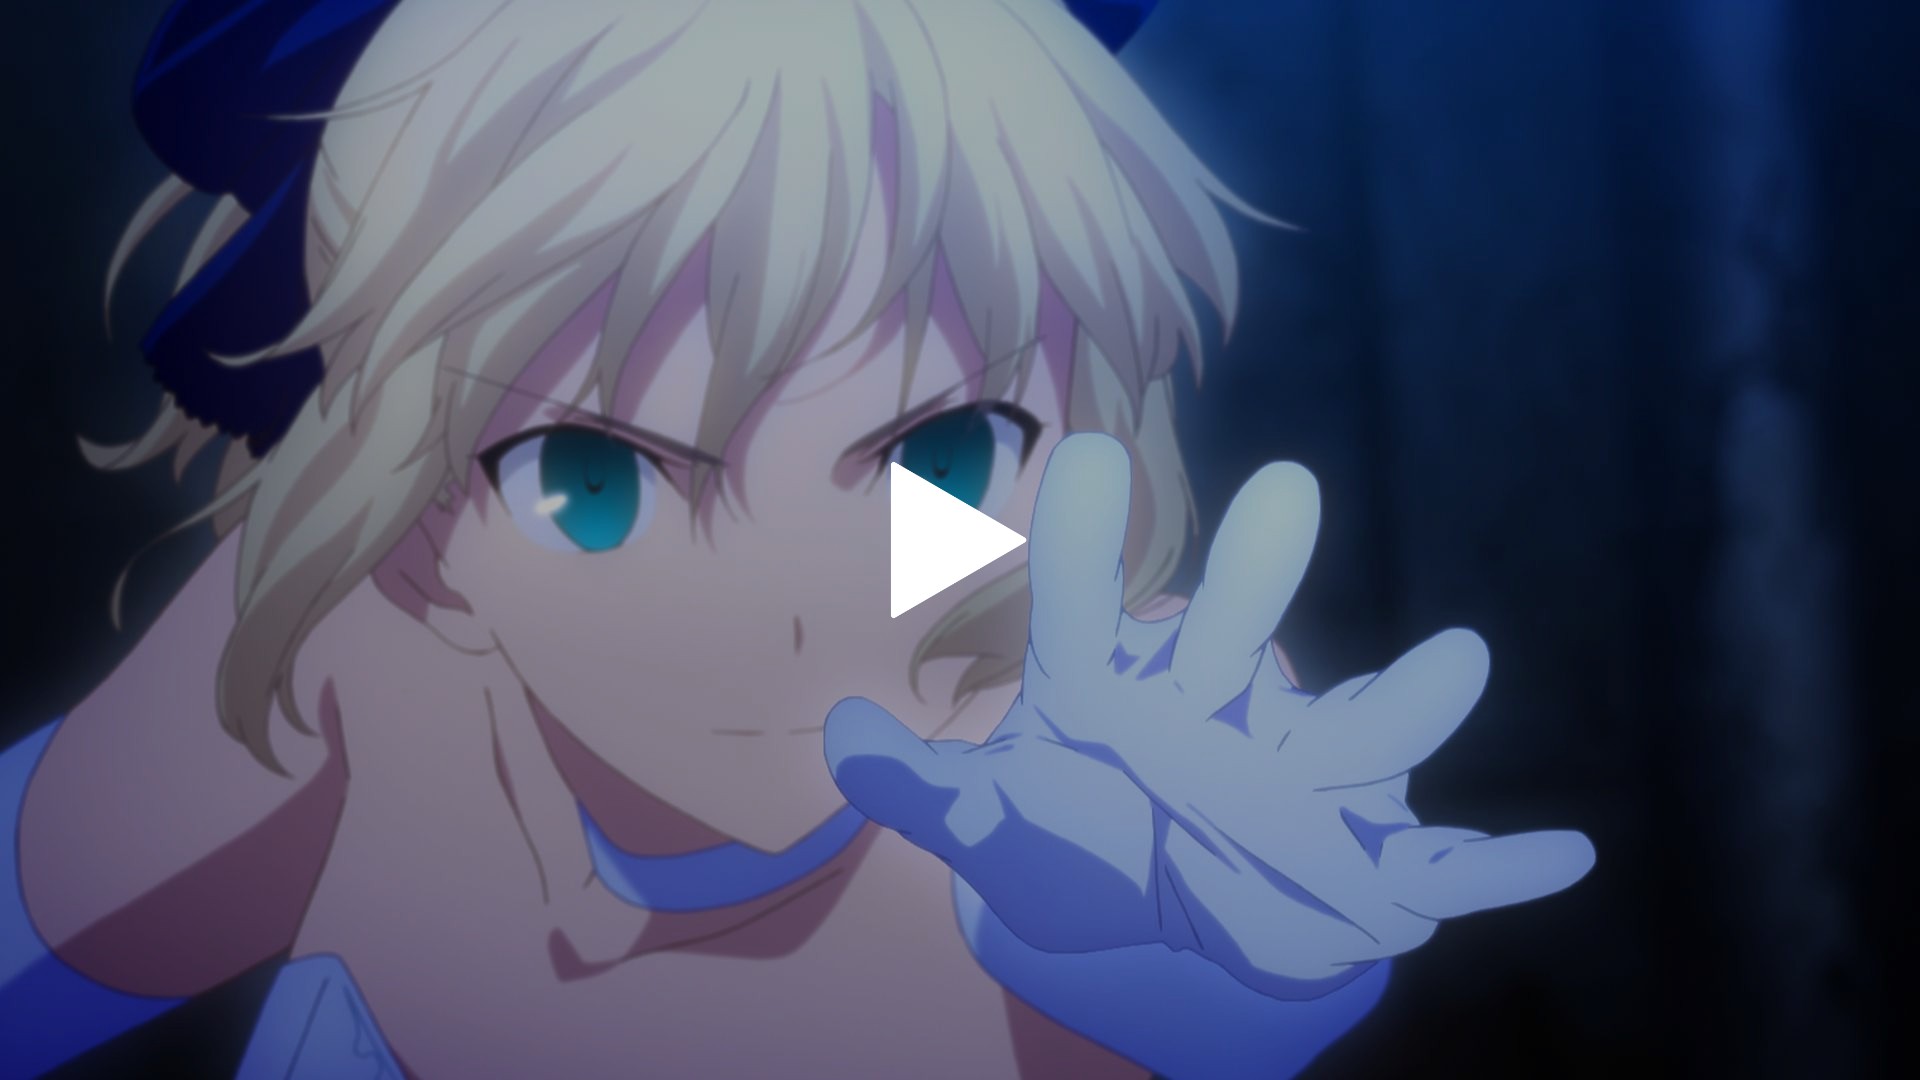 Fate/stay night セイバー -Last Episode- 1/8… - コミック/アニメ